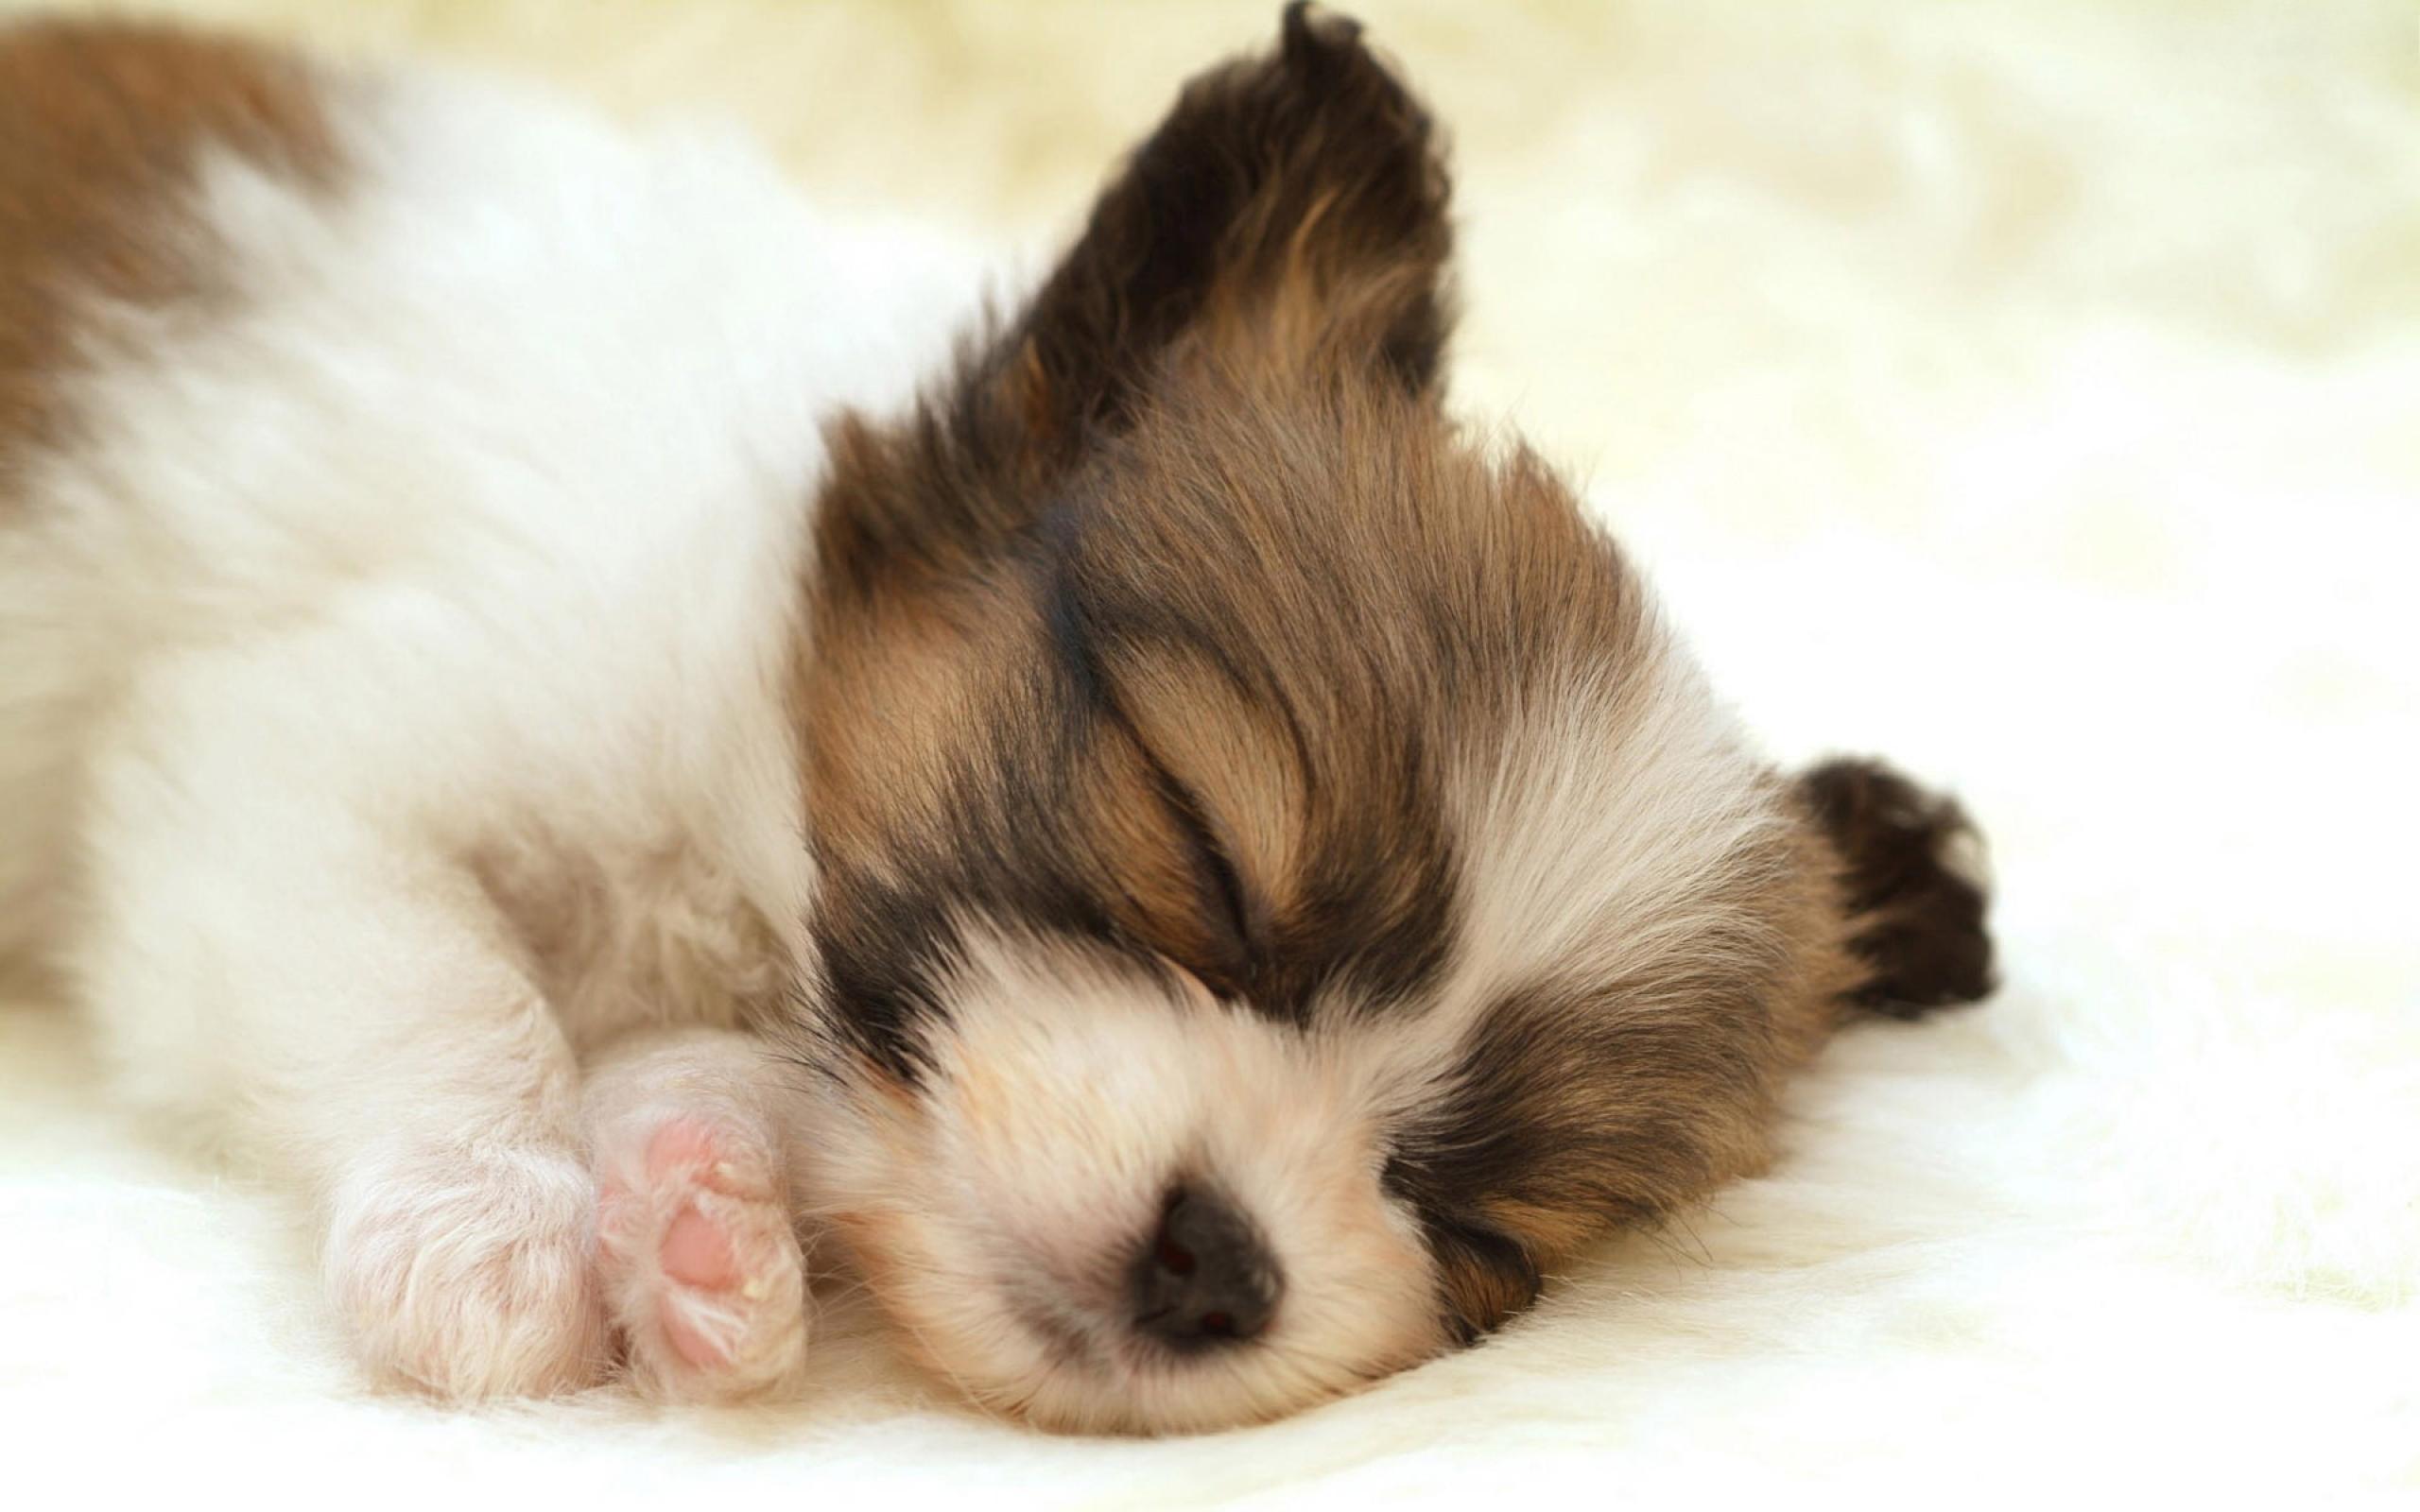 Wallpapers Puppy Dog Sleep Free Backgrounds Desk Wallpapers